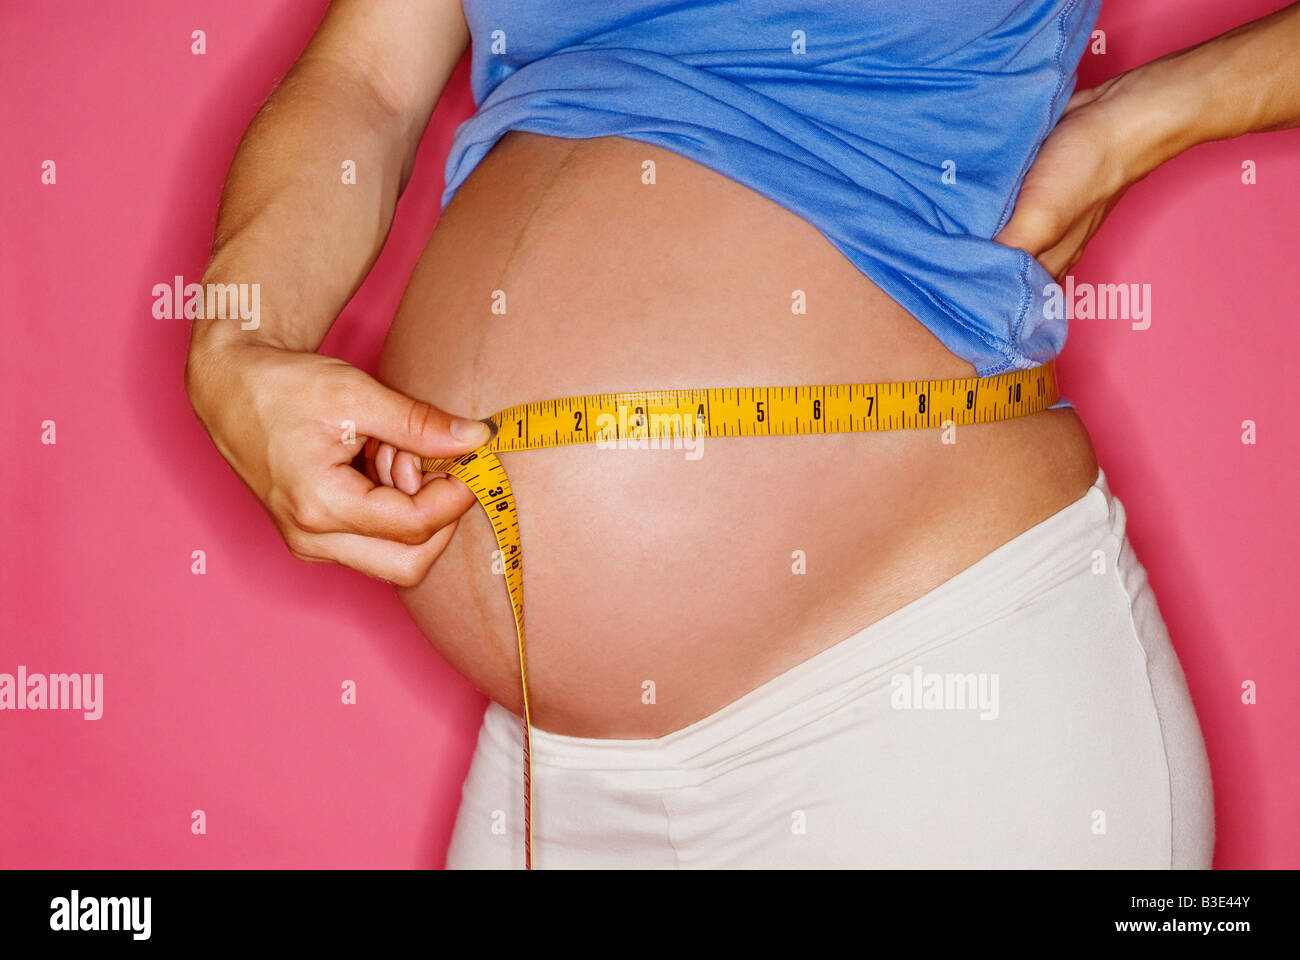 PREGNANT WOMAN MEASURING HER ABDOMEN WITH A MEASURING TAPE. PREGNANCY Stock Photo